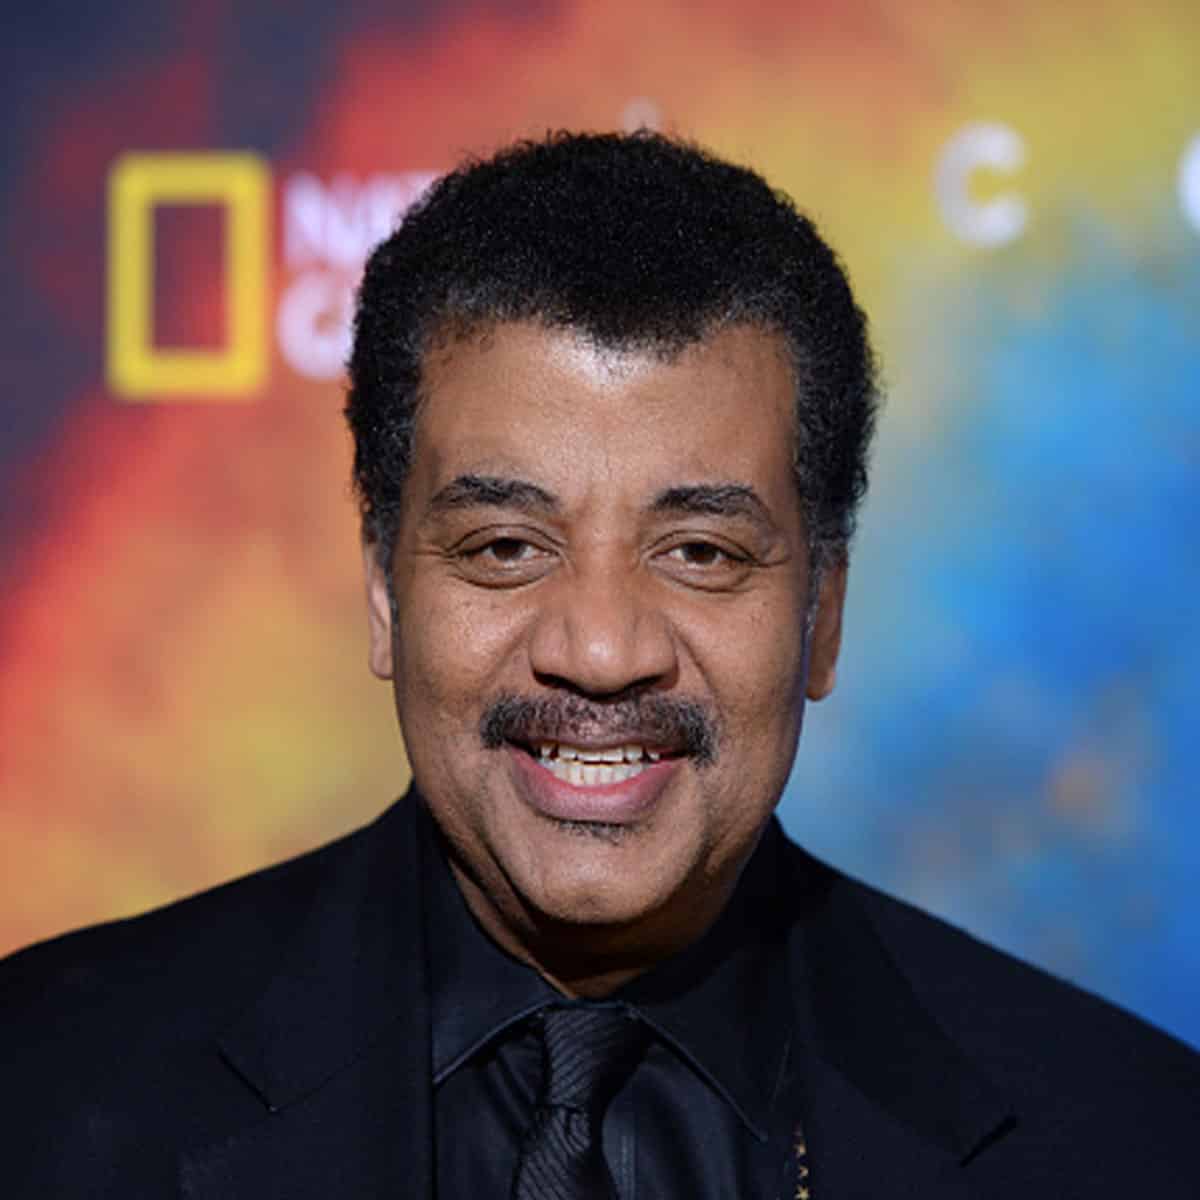 Neil deGrasse Tyson arrives at National Geographic's "Cosmos: Possible Worlds"